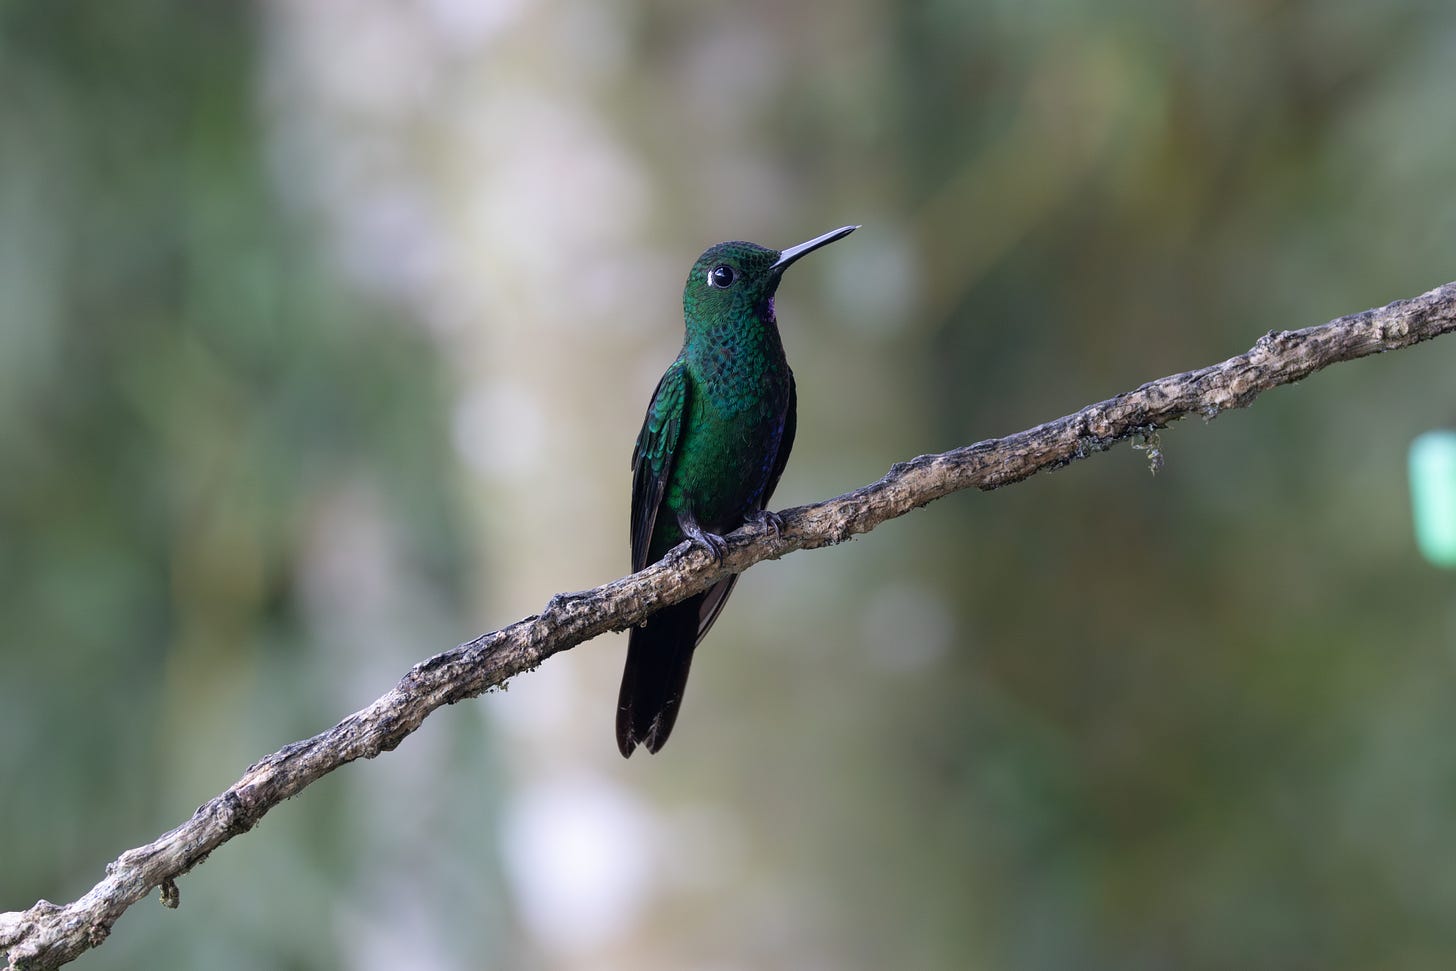 an all-green hummingbird (but like, really green) perched on a stick